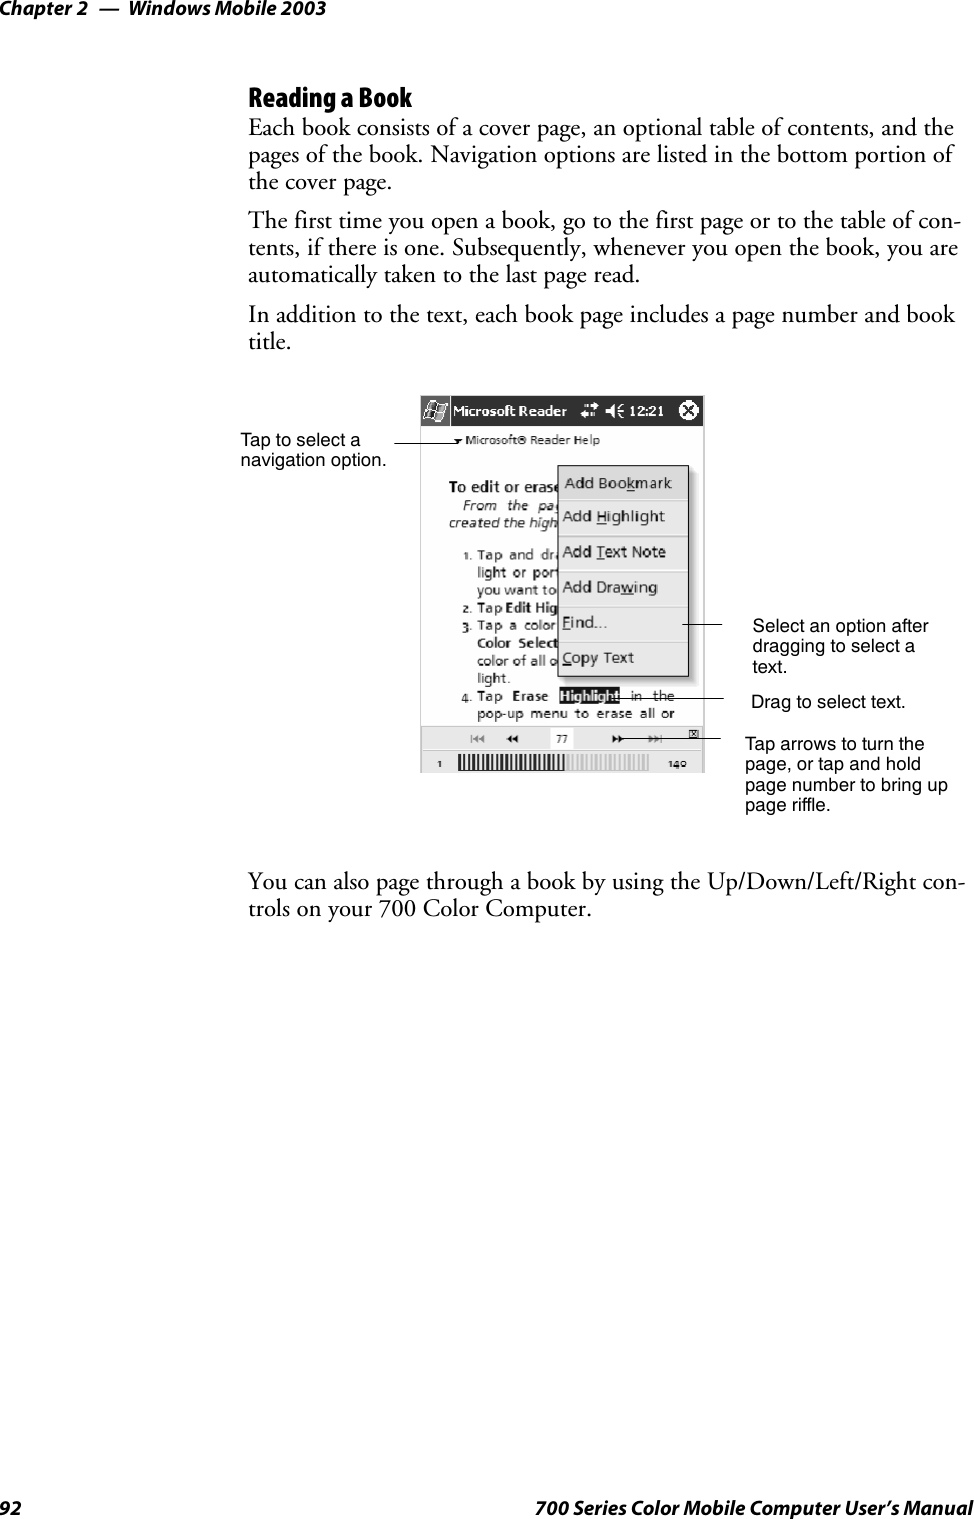 Windows Mobile 2003Chapter —292 700 Series Color Mobile Computer User’s ManualReading a BookEach book consists of a cover page, an optional table of contents, and thepages of the book. Navigation options are listed in the bottom portion ofthe cover page.The first time you open a book, go to the first page or to the table of con-tents, if there is one. Subsequently, whenever you open the book, you areautomatically taken to the last page read.In addition to the text, each book page includes a page number and booktitle.Taptoselectanavigation option.Select an option afterdragging to select atext.Drag to select text.Tap arrows to turn thepage, or tap and holdpage number to bring uppage riffle.You can also page through a book by using the Up/Down/Left/Right con-trols on your 700 Color Computer.